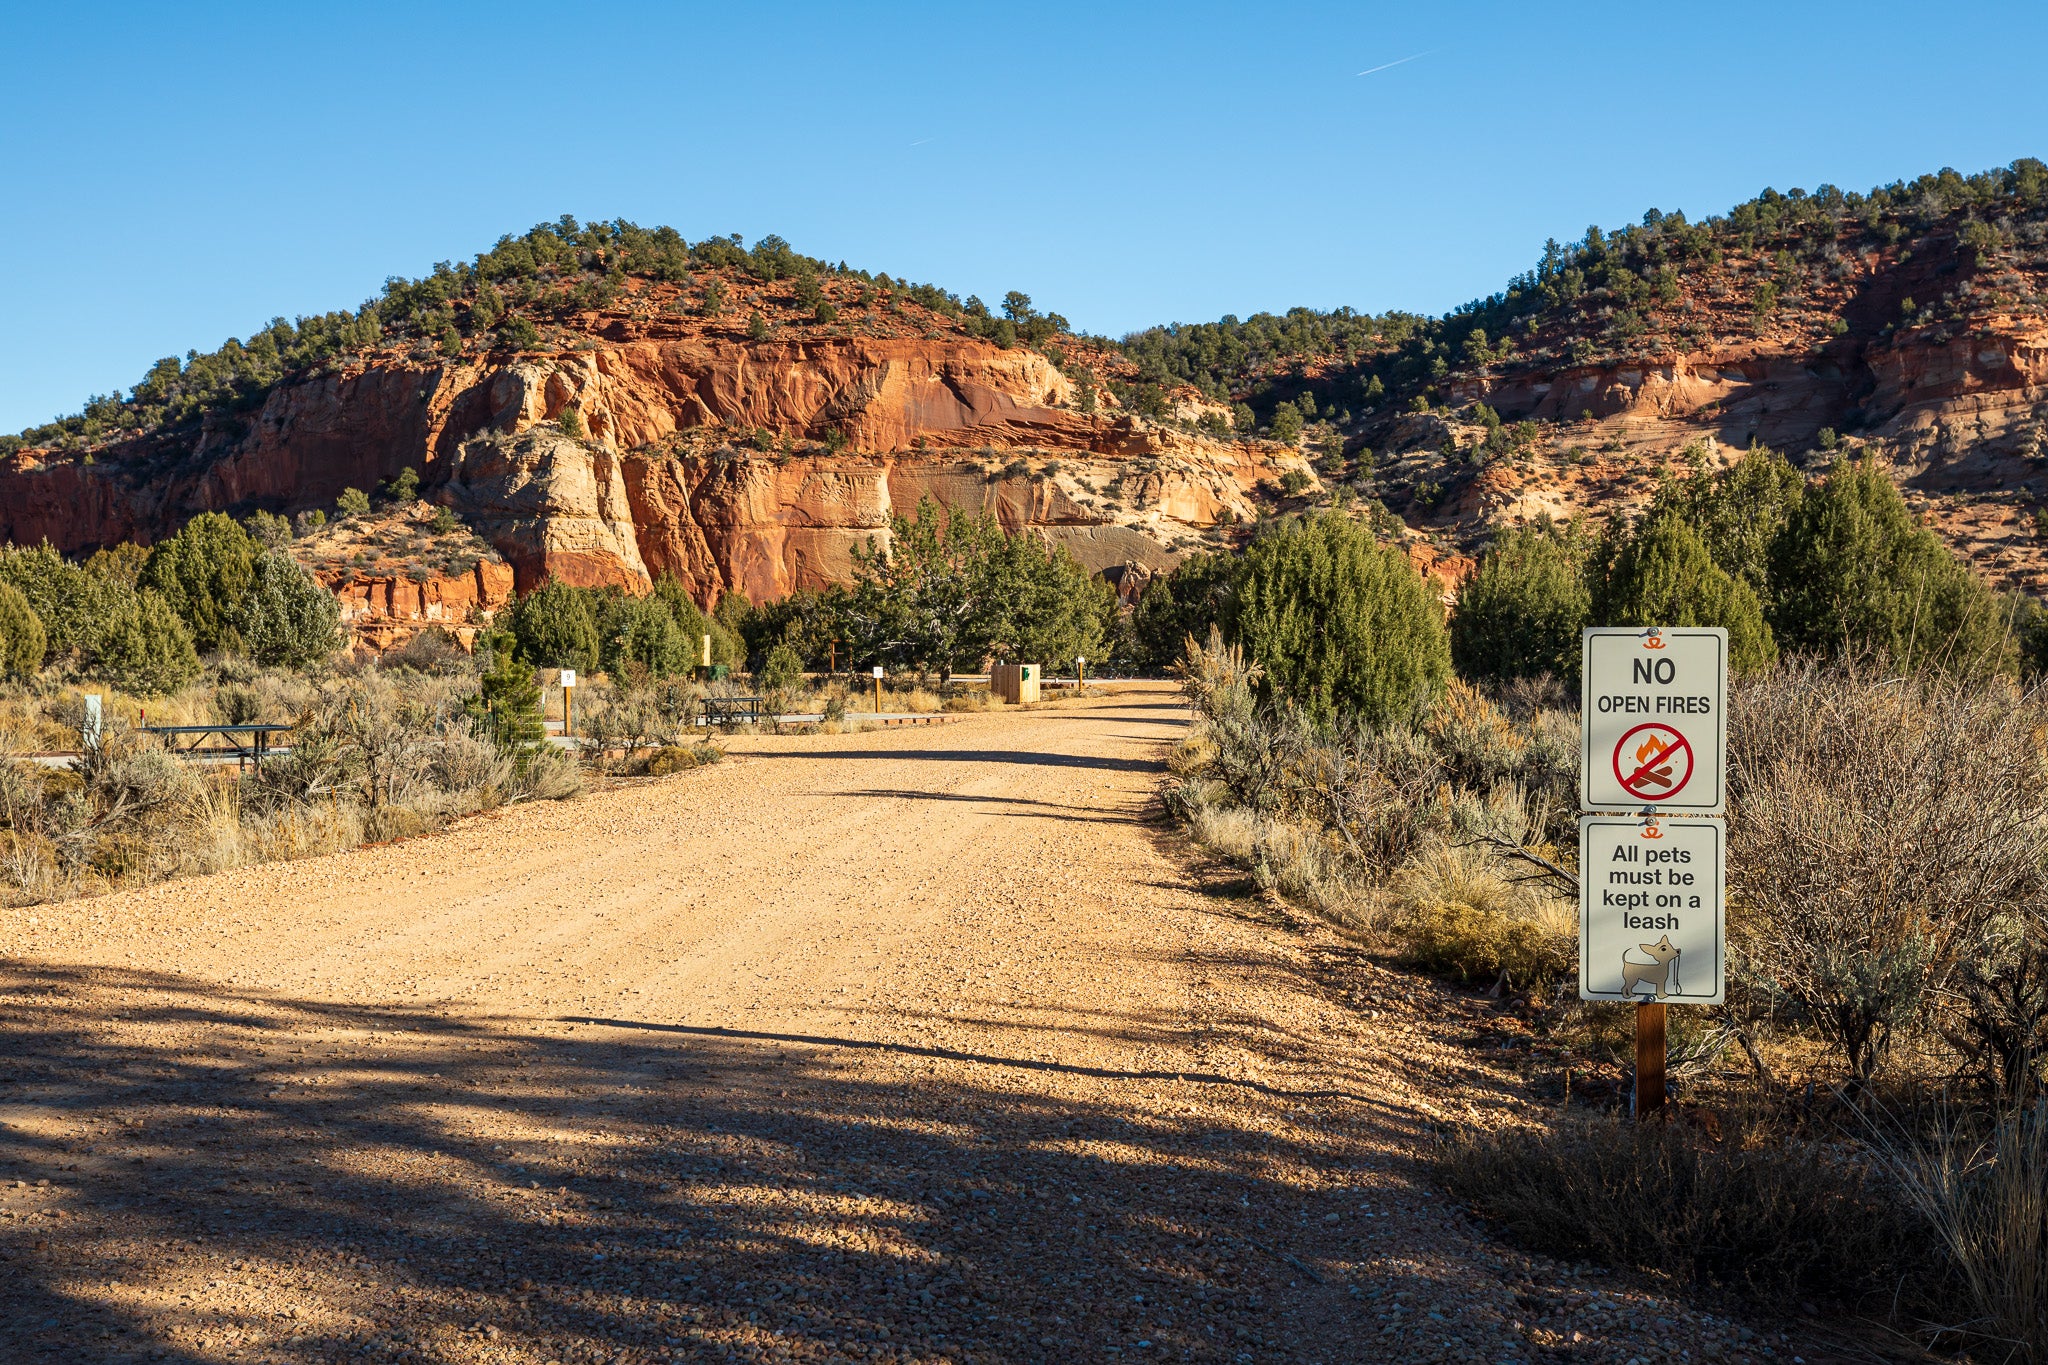 Road into the Best Friends RV Park space with signs that say “No open fires” and “All pets must be kept on a leash” in front of red rock cliffs